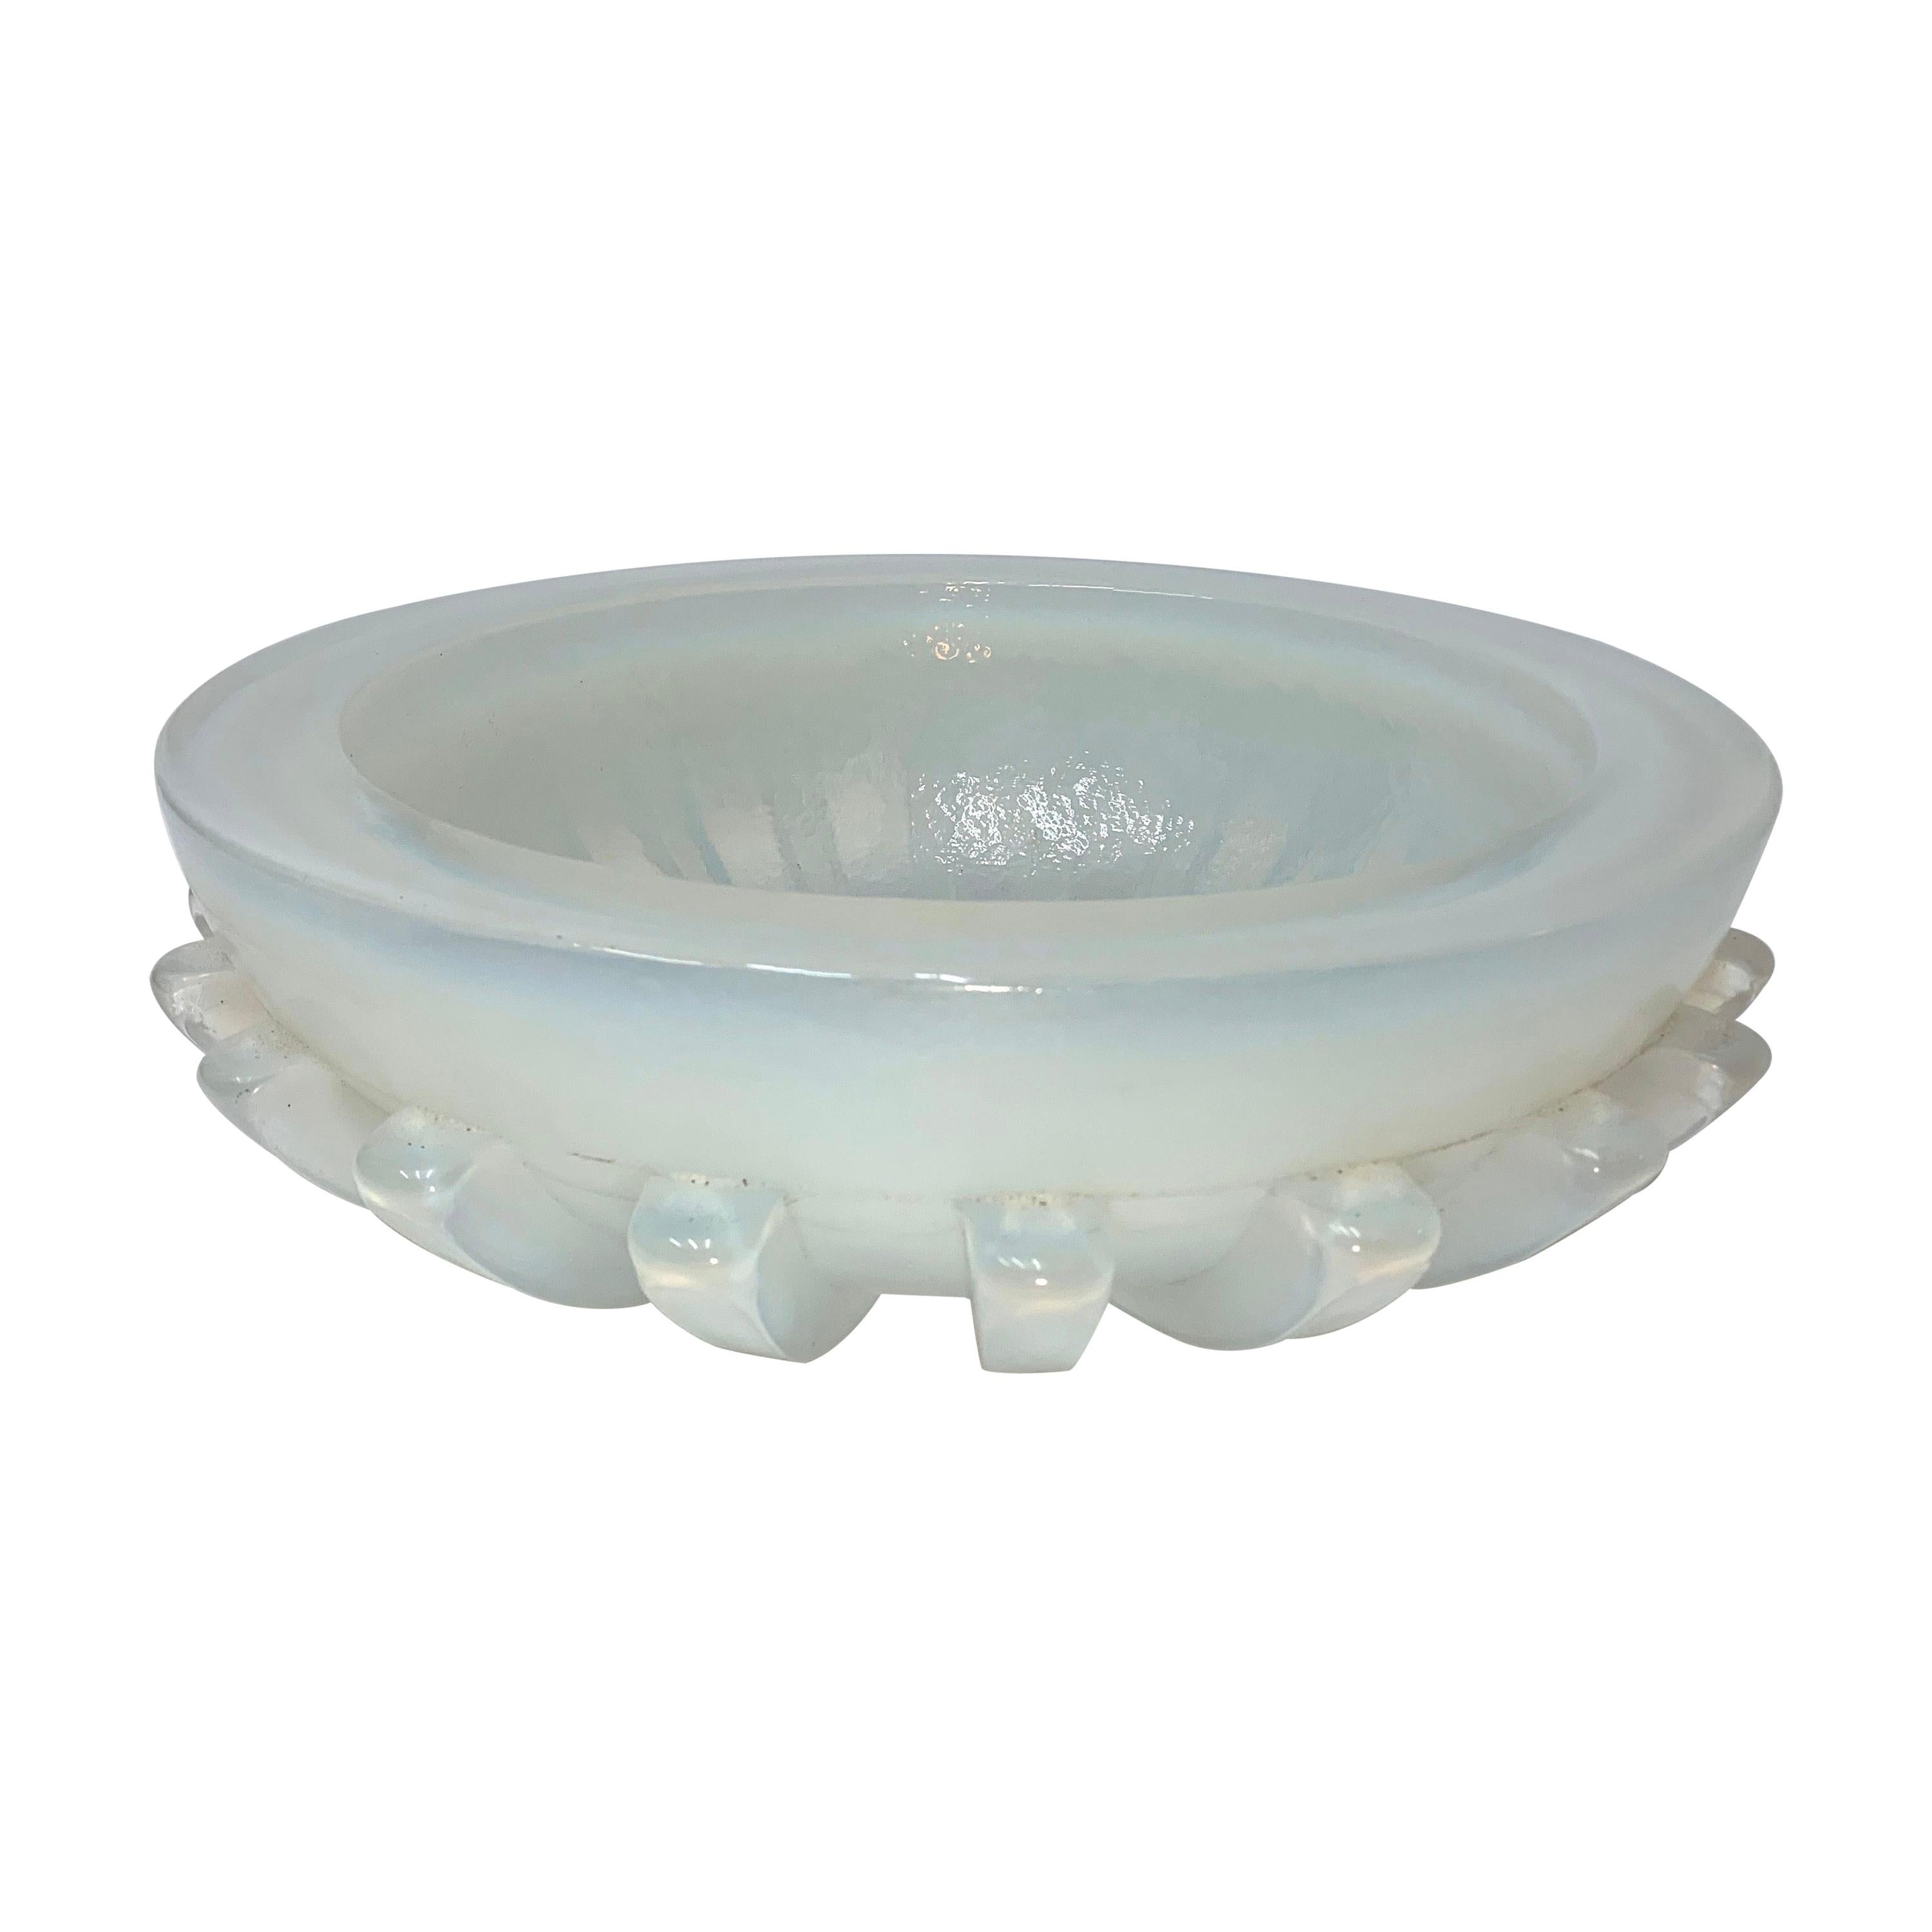 Massive Iridescent Opaline Murano Glass Bowl with Buttress Accents